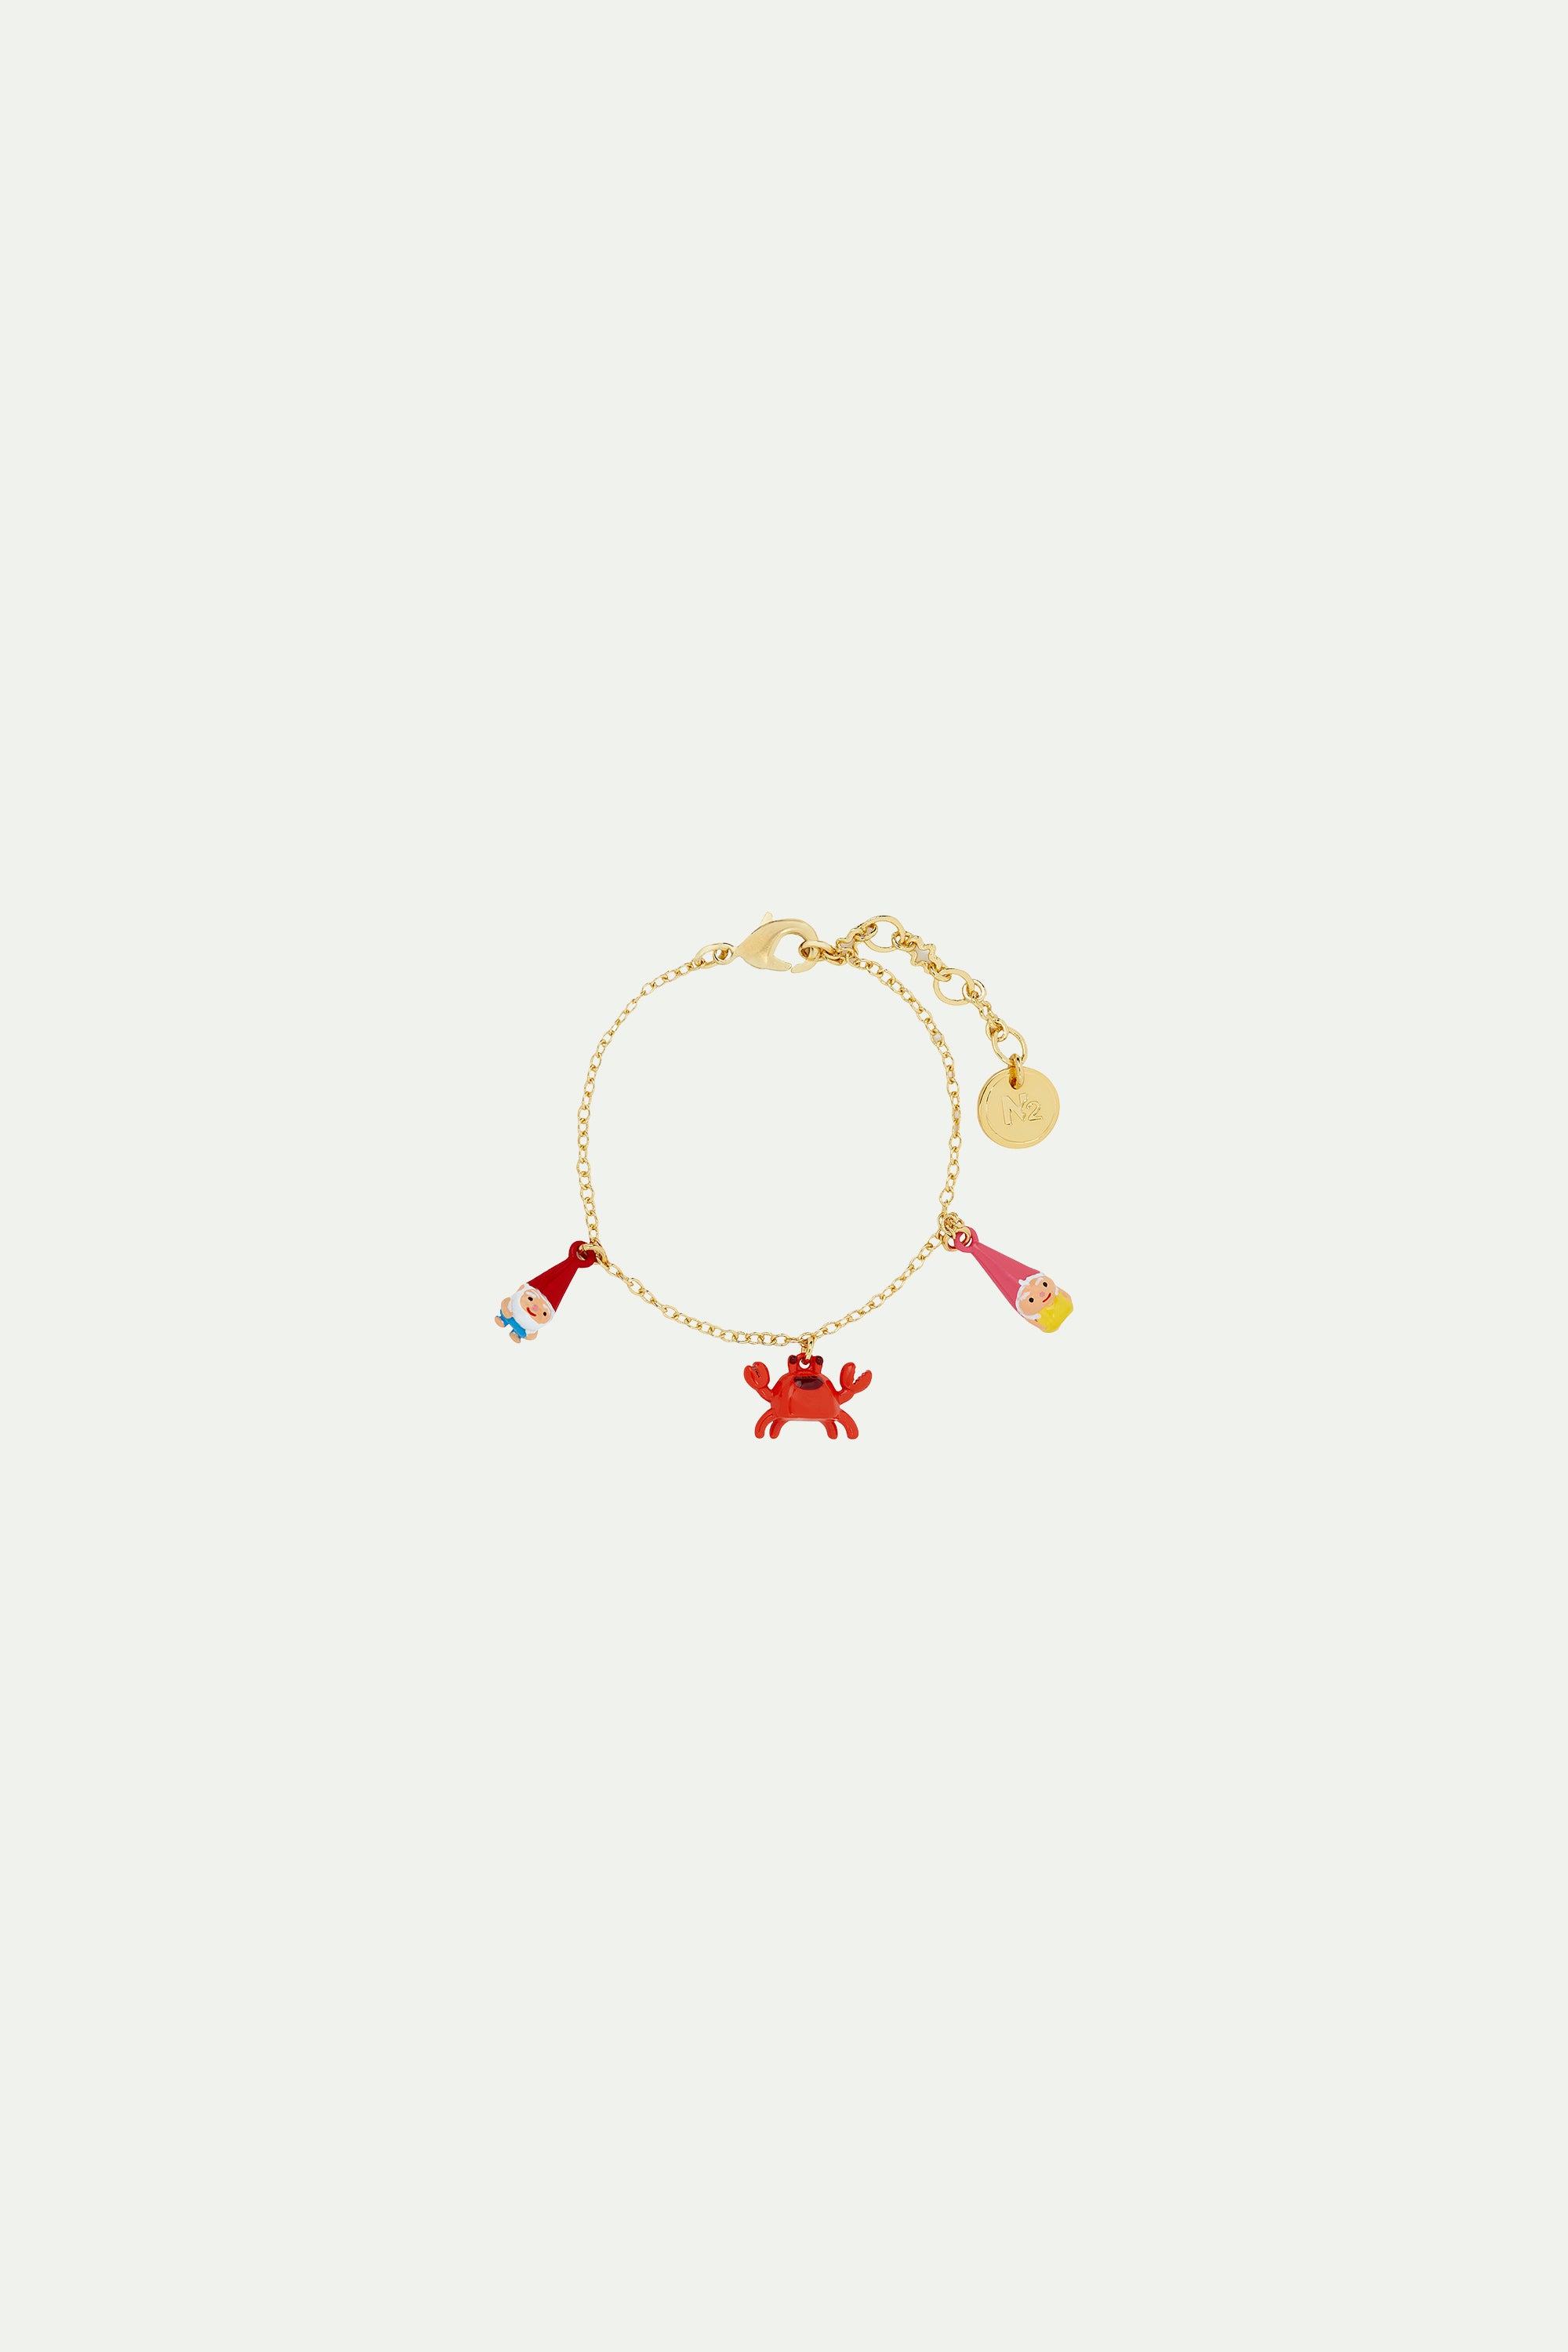 Garden gnome and red crab charm bracelet